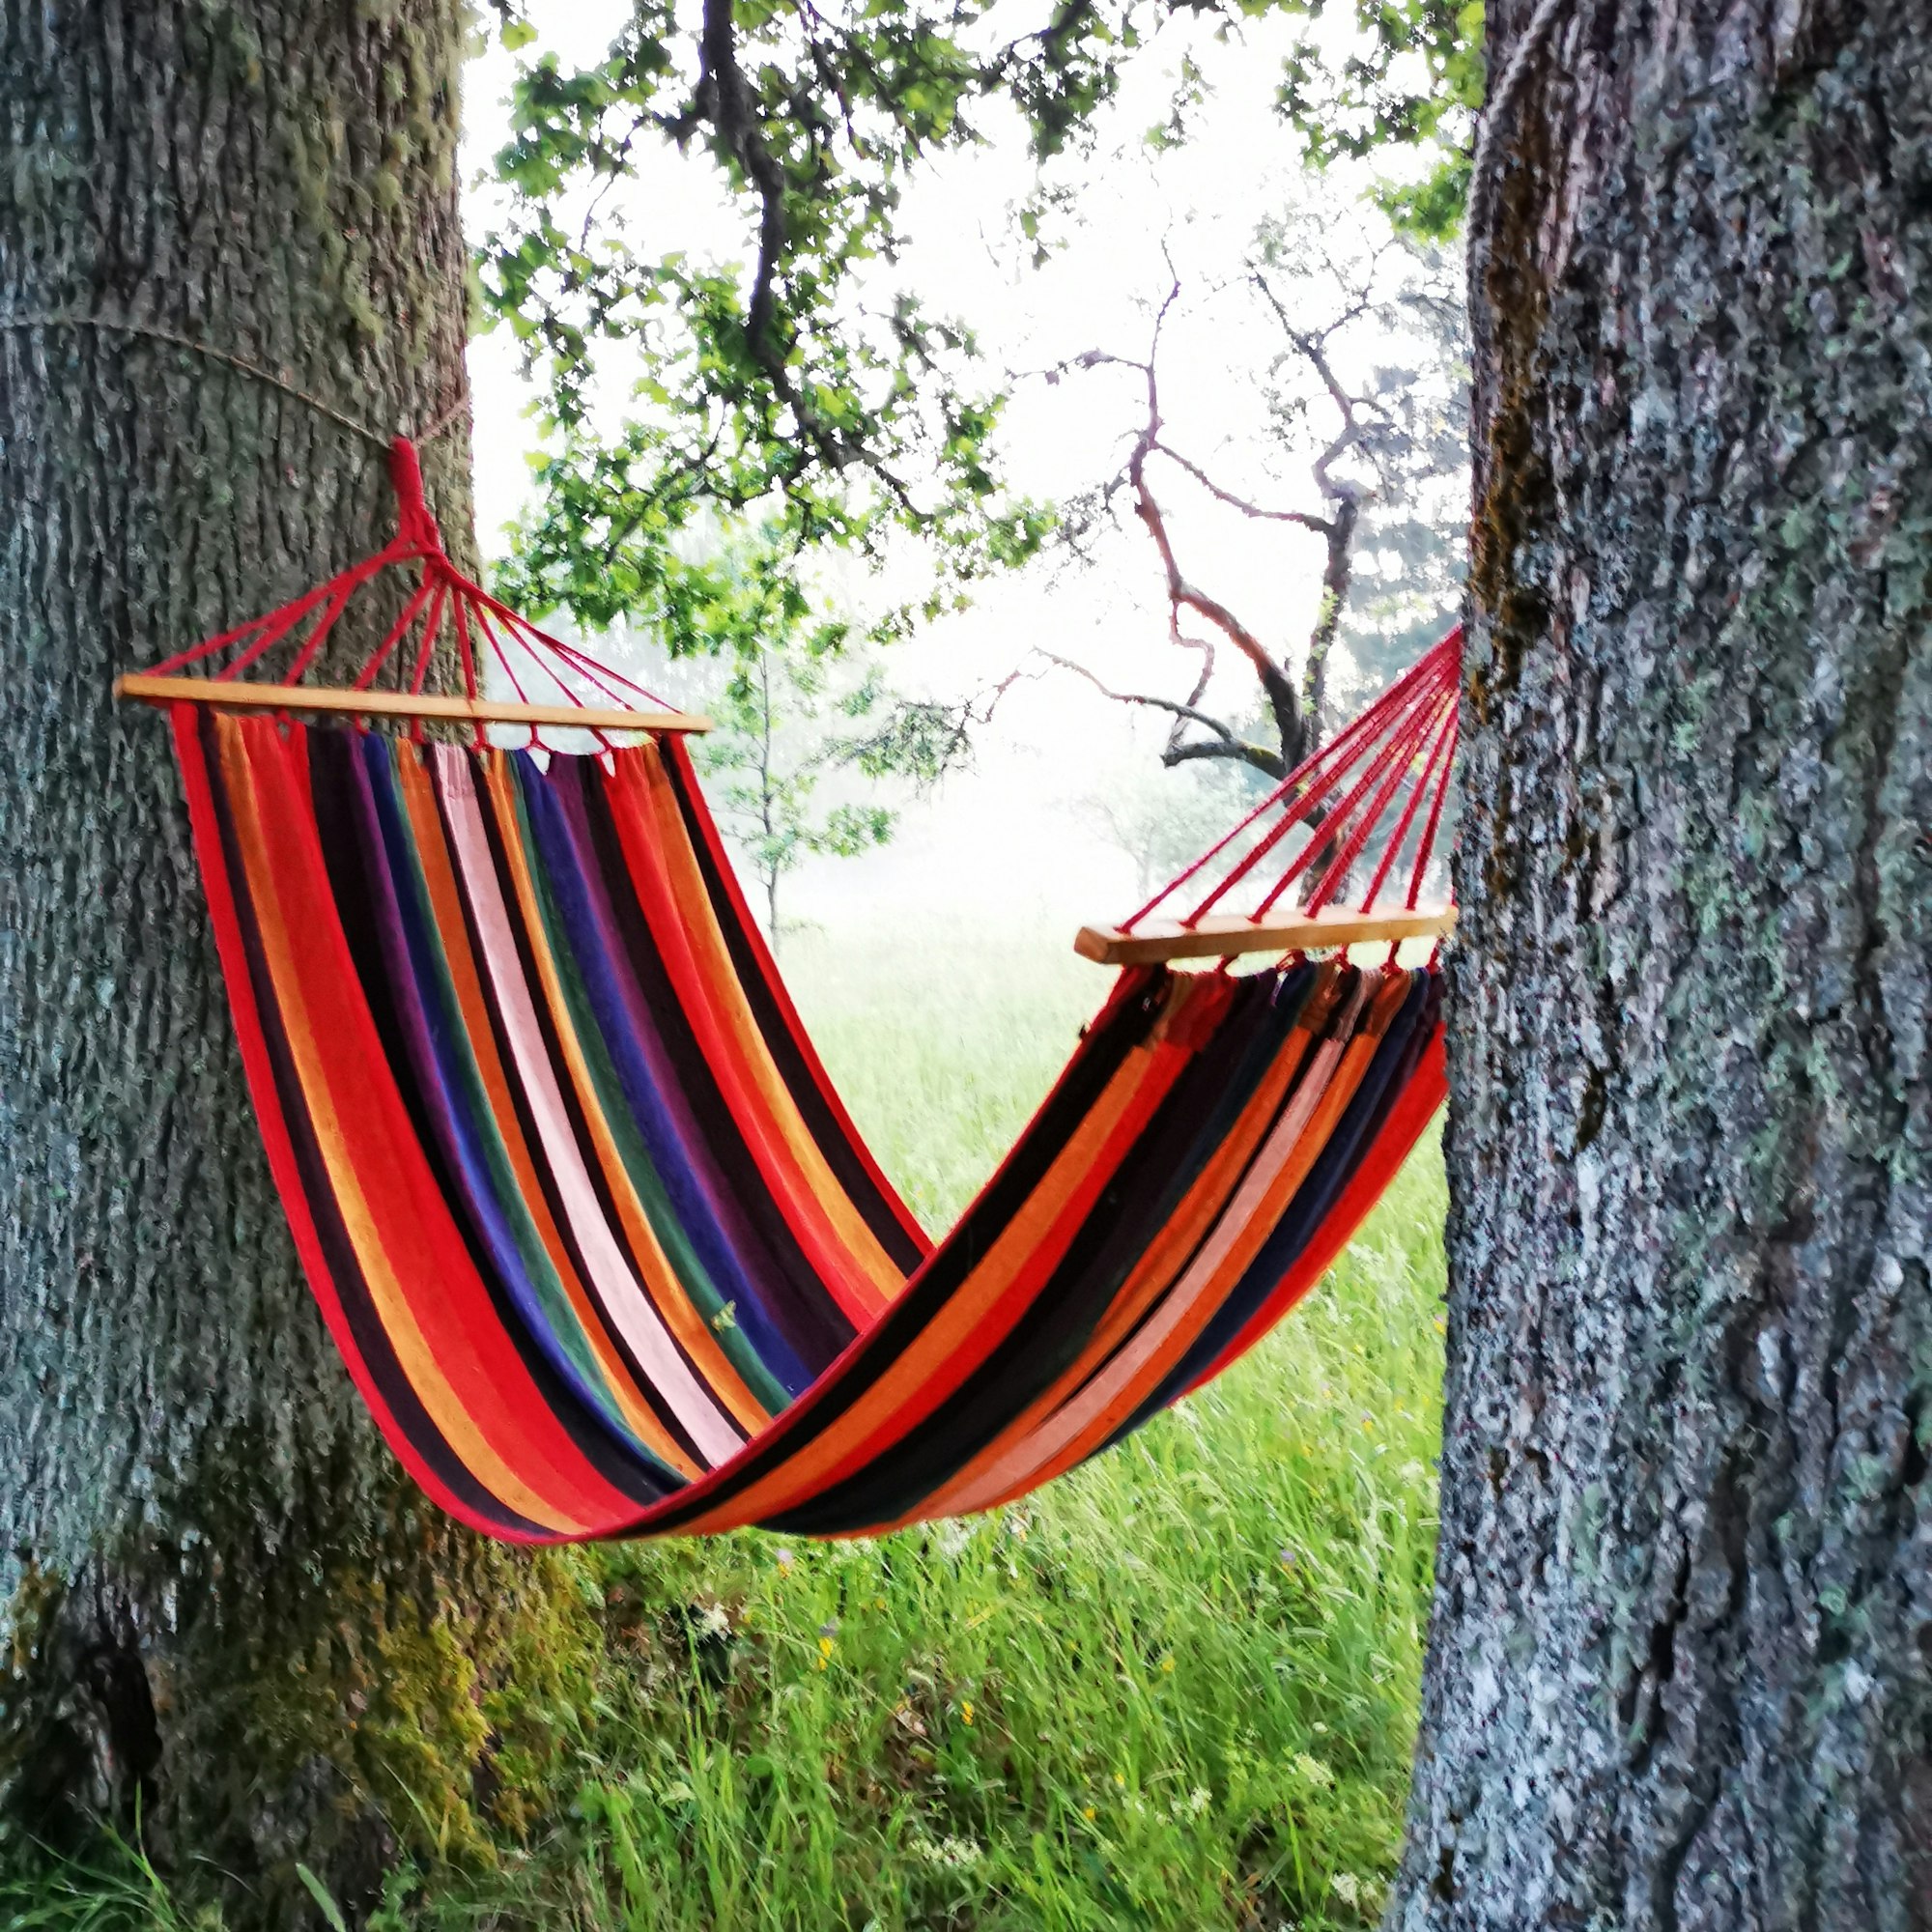 Colourful hammock suspended between two trees, illustrating the concept of a pelvic floor hammock.